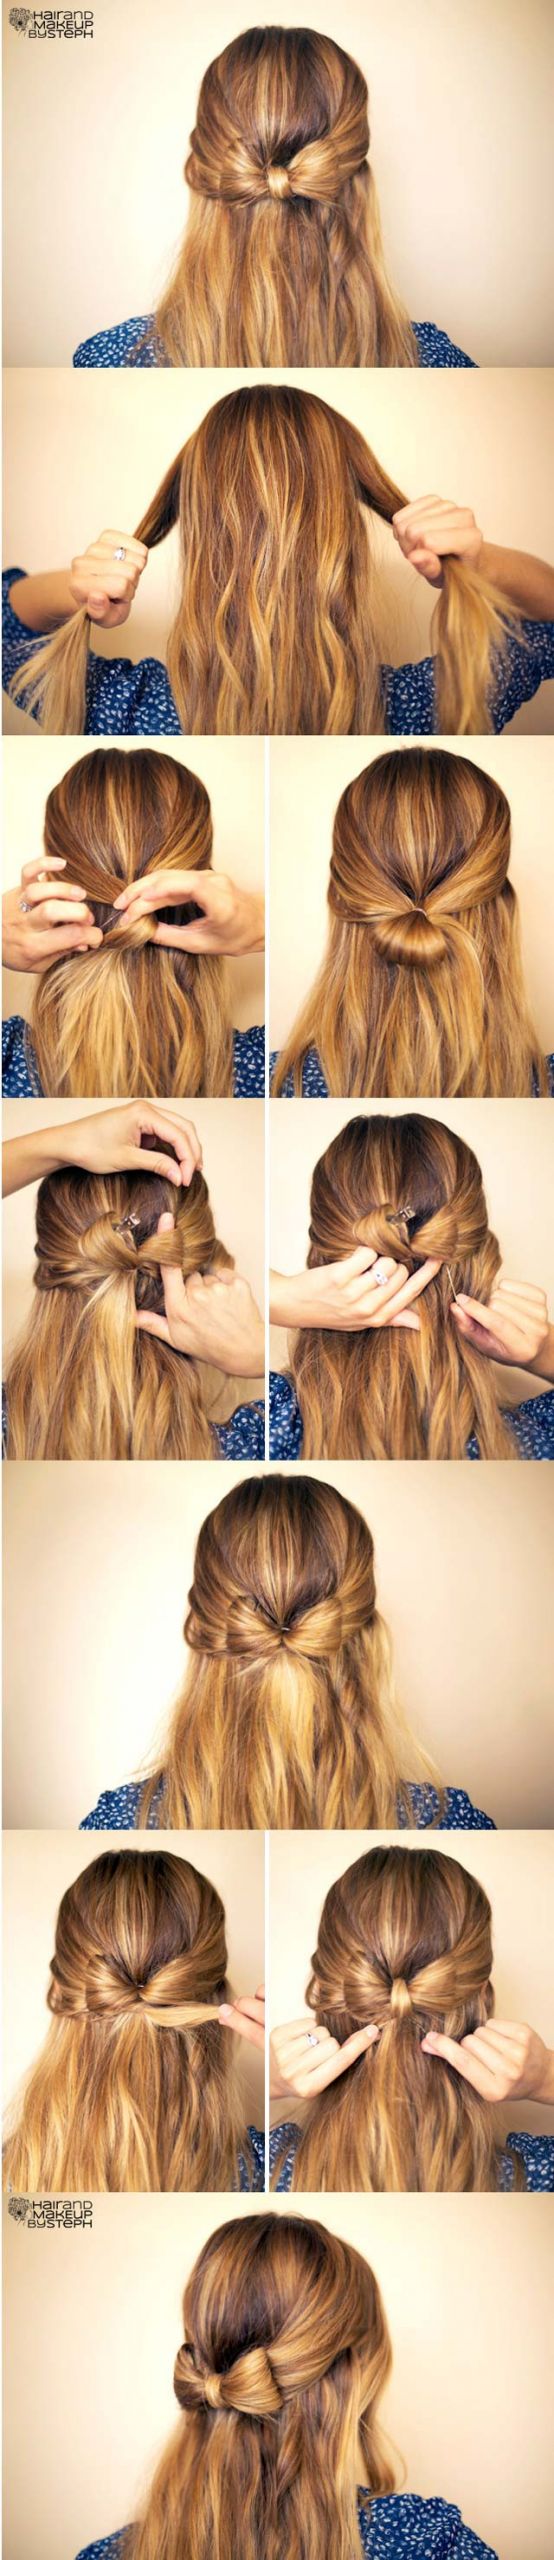 Easy Hairstyles For Medium Hair Step By Step
 Super Easy Step by Step Hairstyle Ideas fashionsy